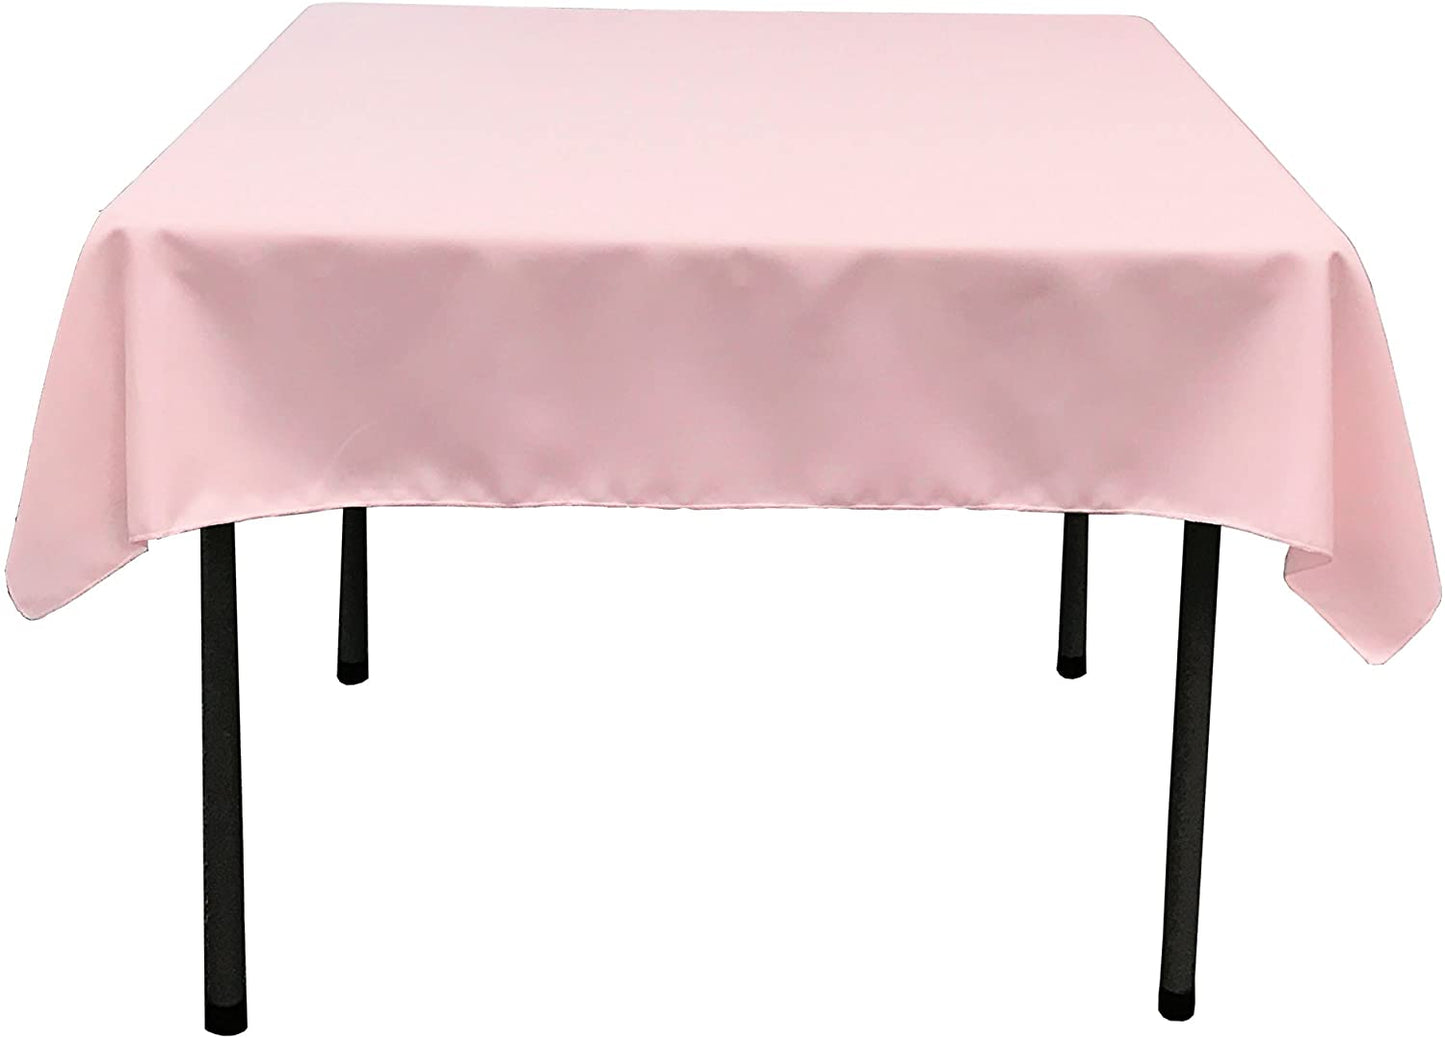 Polyester Poplin Washable Square Tablecloth, Stain and Wrinkle Resistant Table Cover Pink